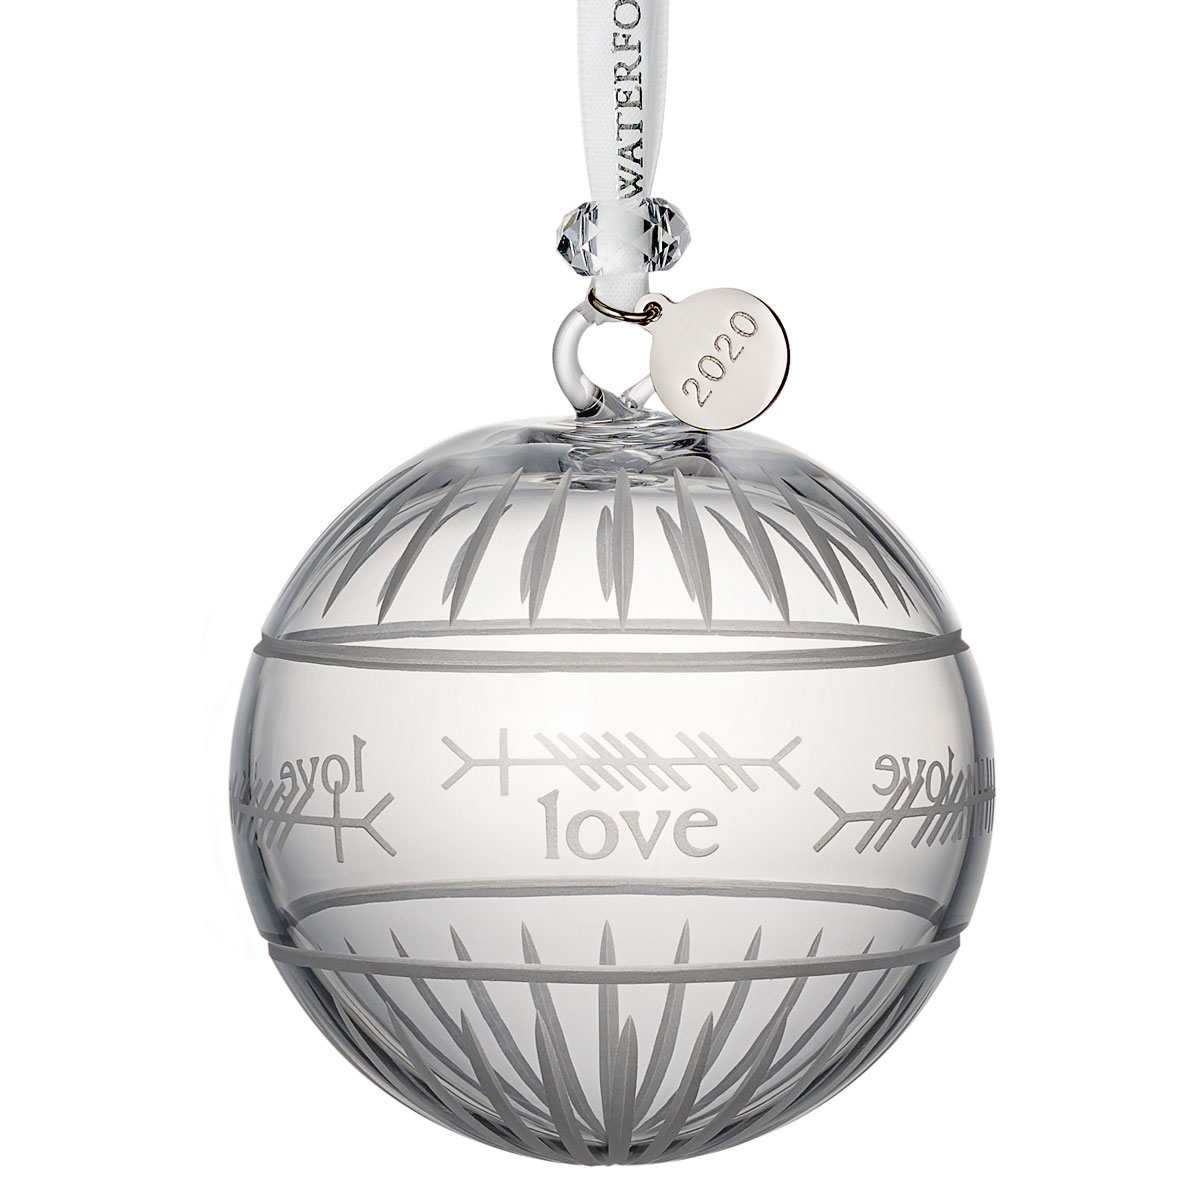 Waterford Crystal 2020 Ogham Love Ball Christmas Ornament